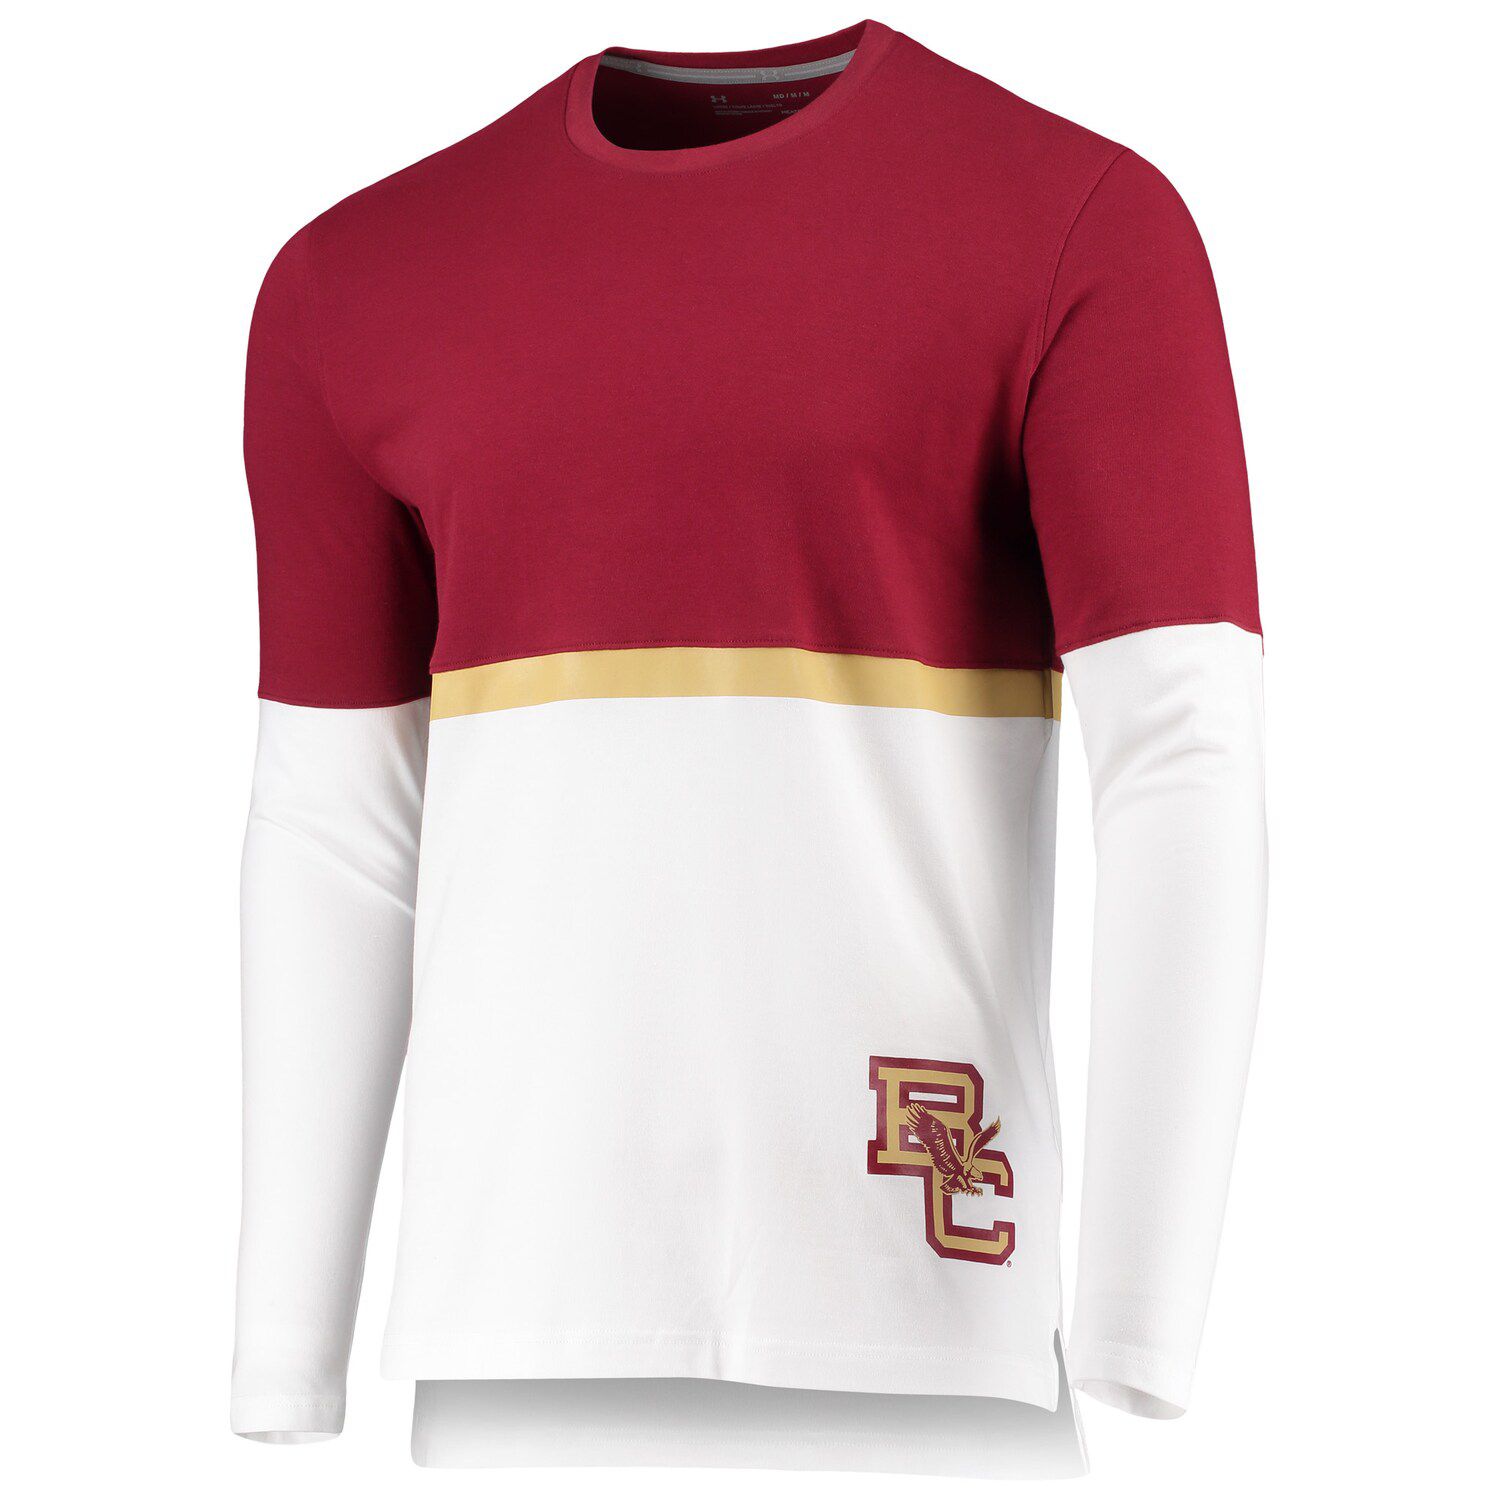 under armour maroon t shirt